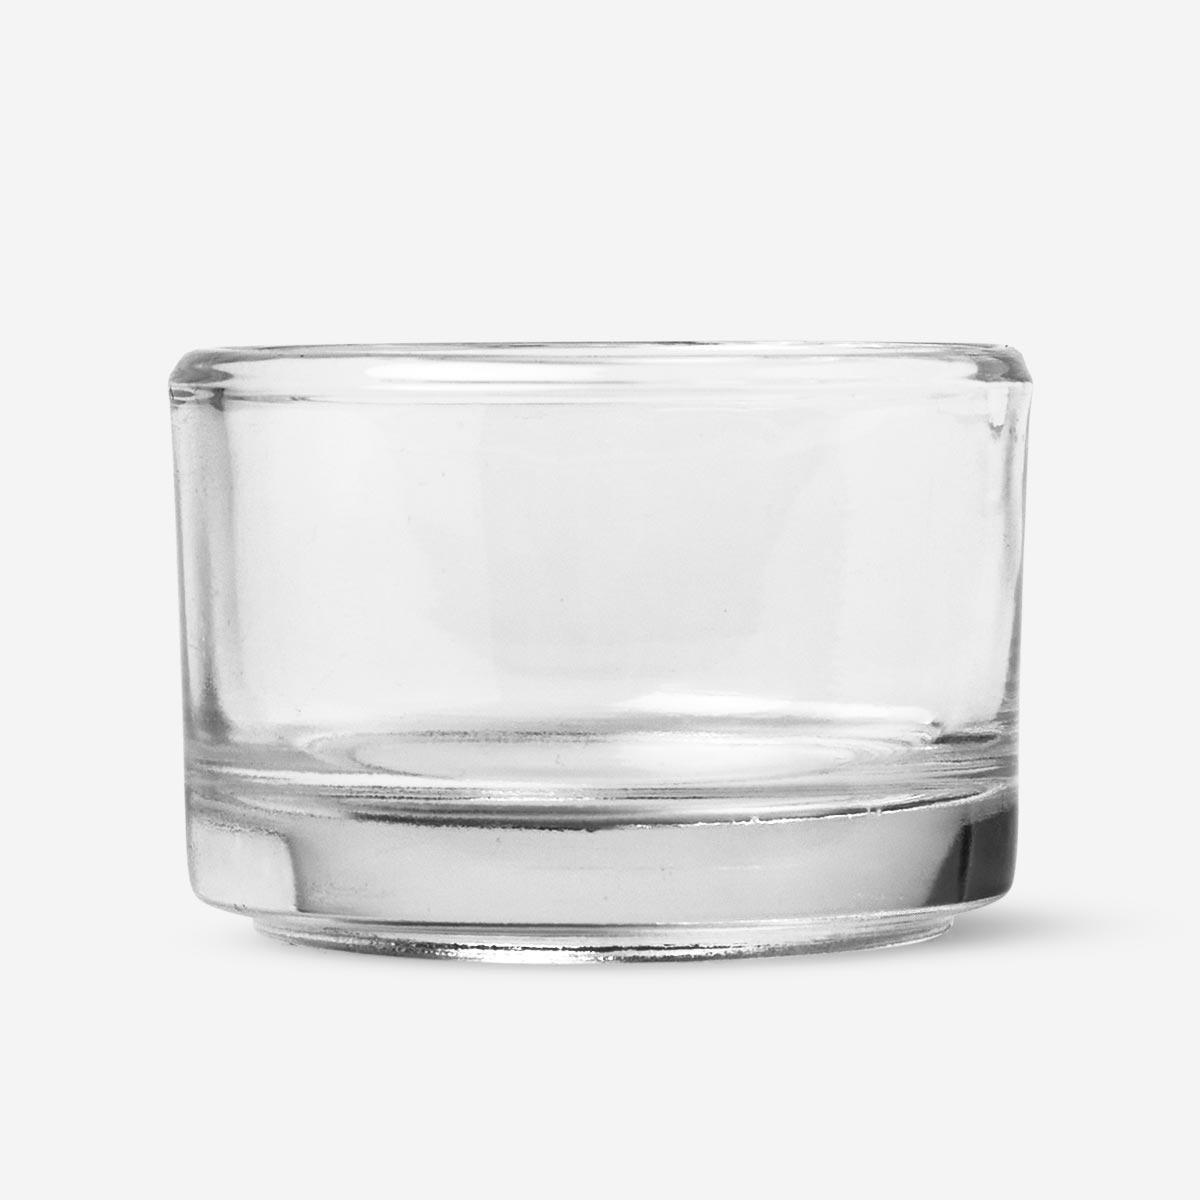 Glass candle holder